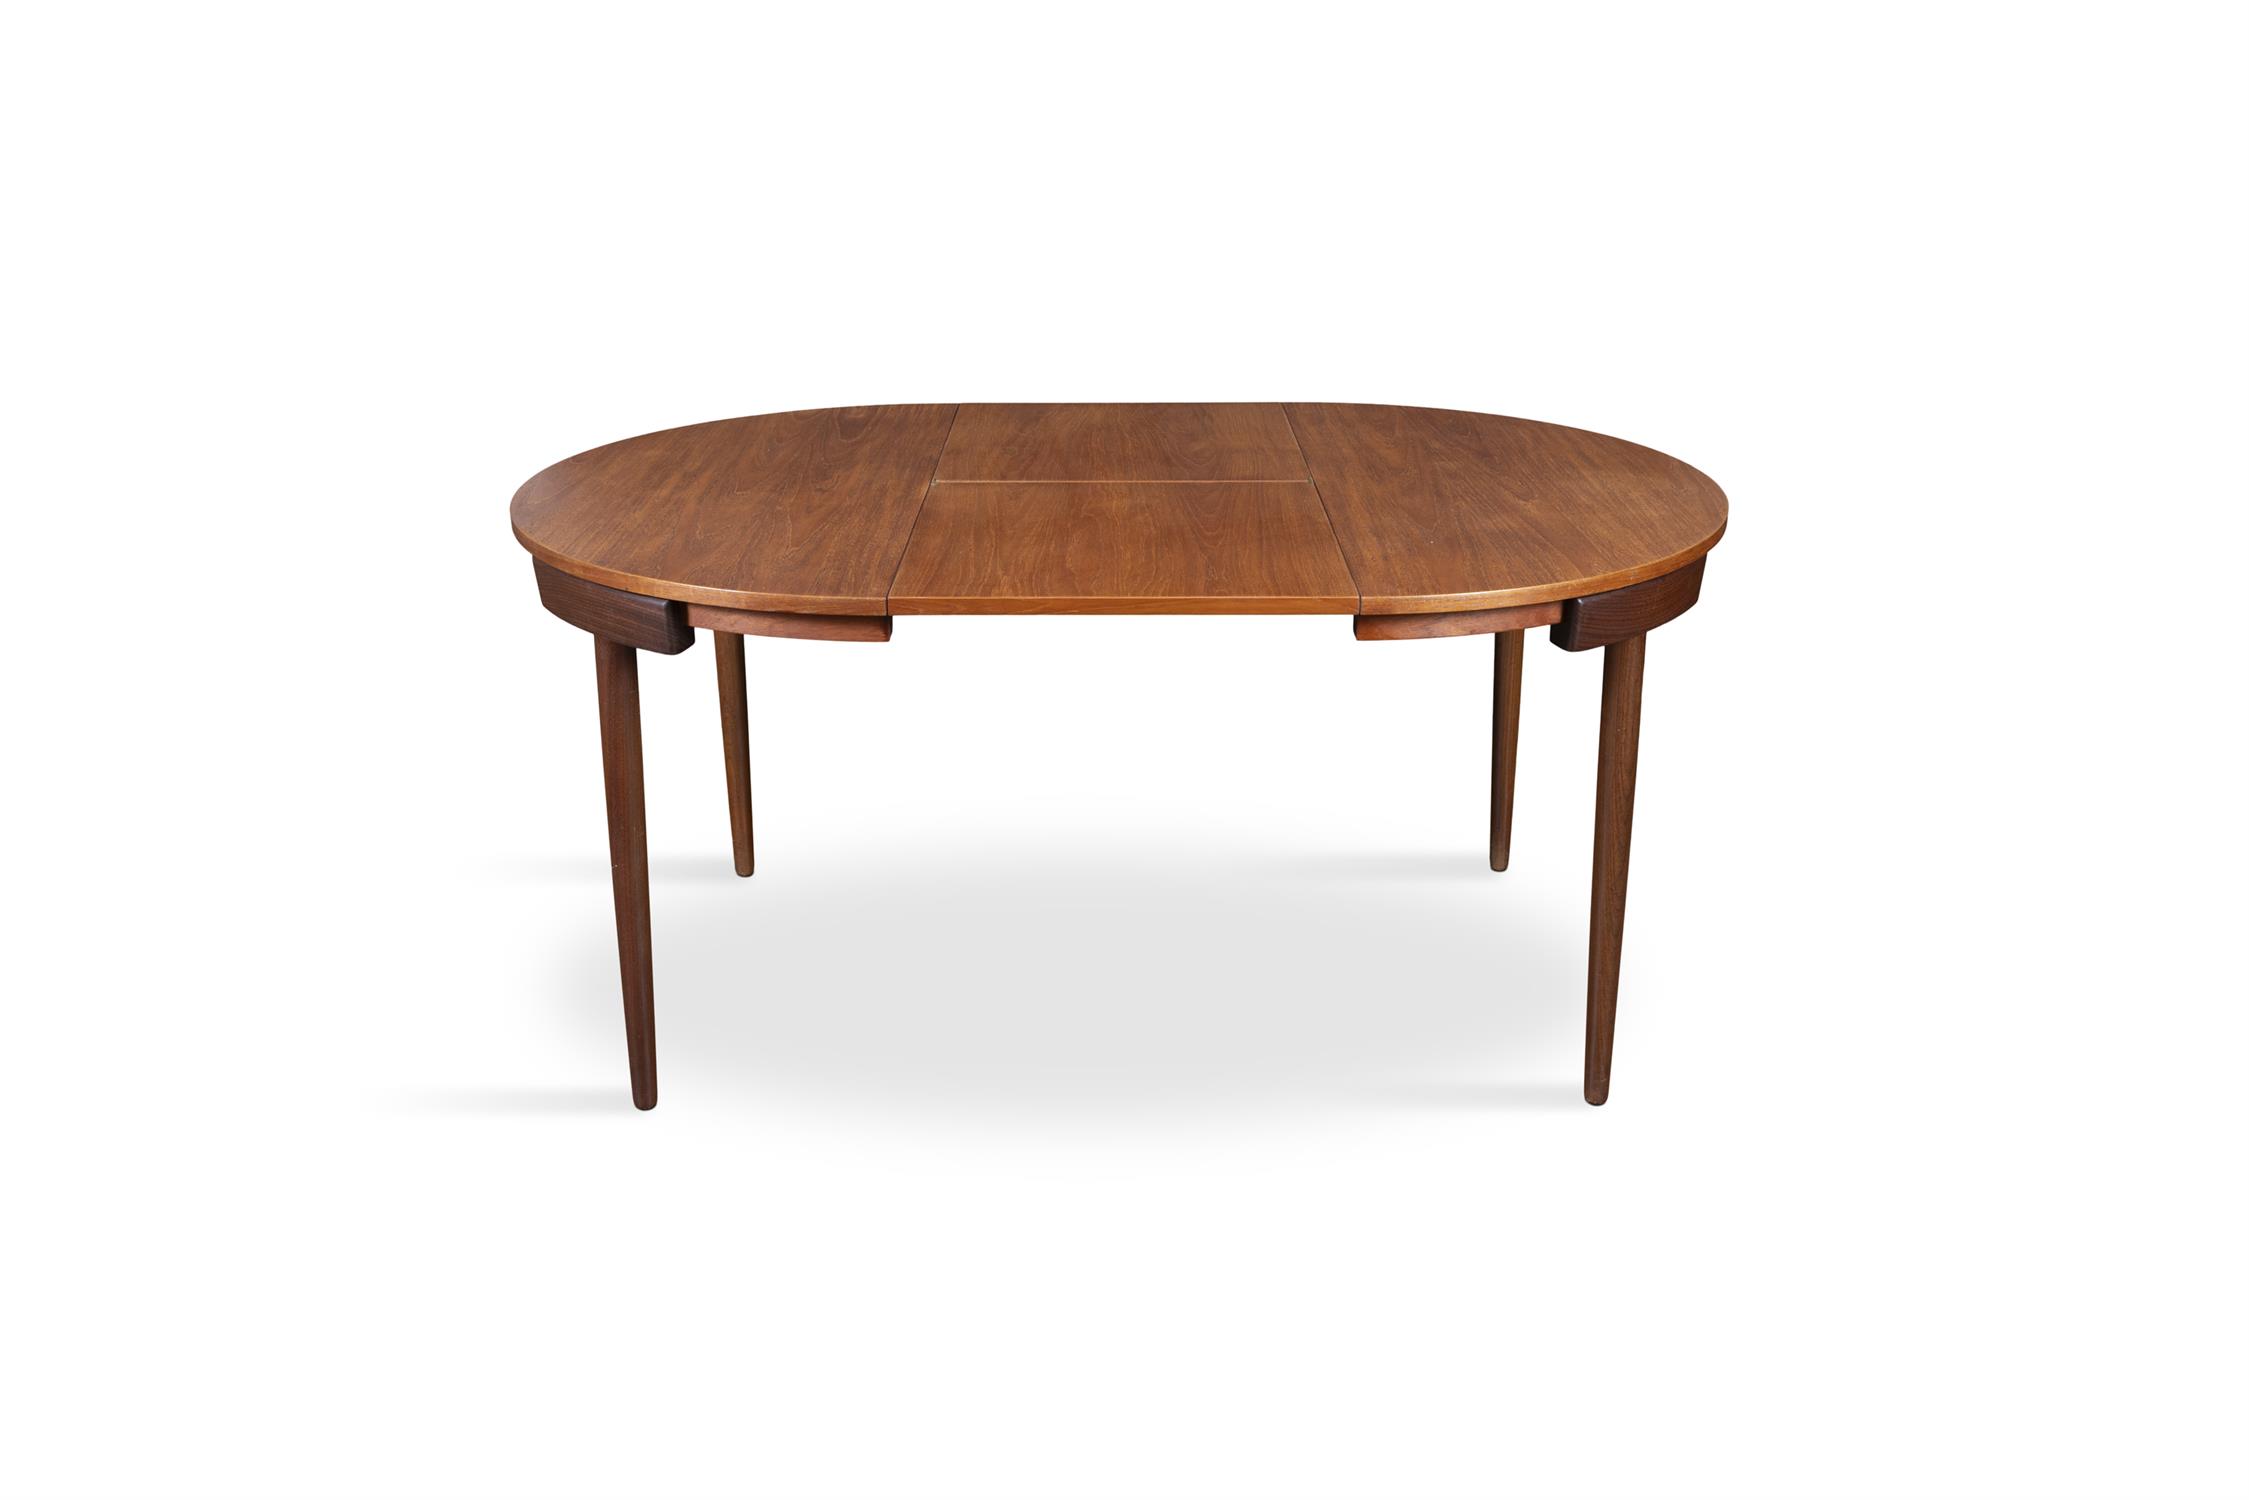 FREM ROJLE A teak circular extending dining table with 4 chairs by Hans Olsen for Frem Rojle. - Image 6 of 9